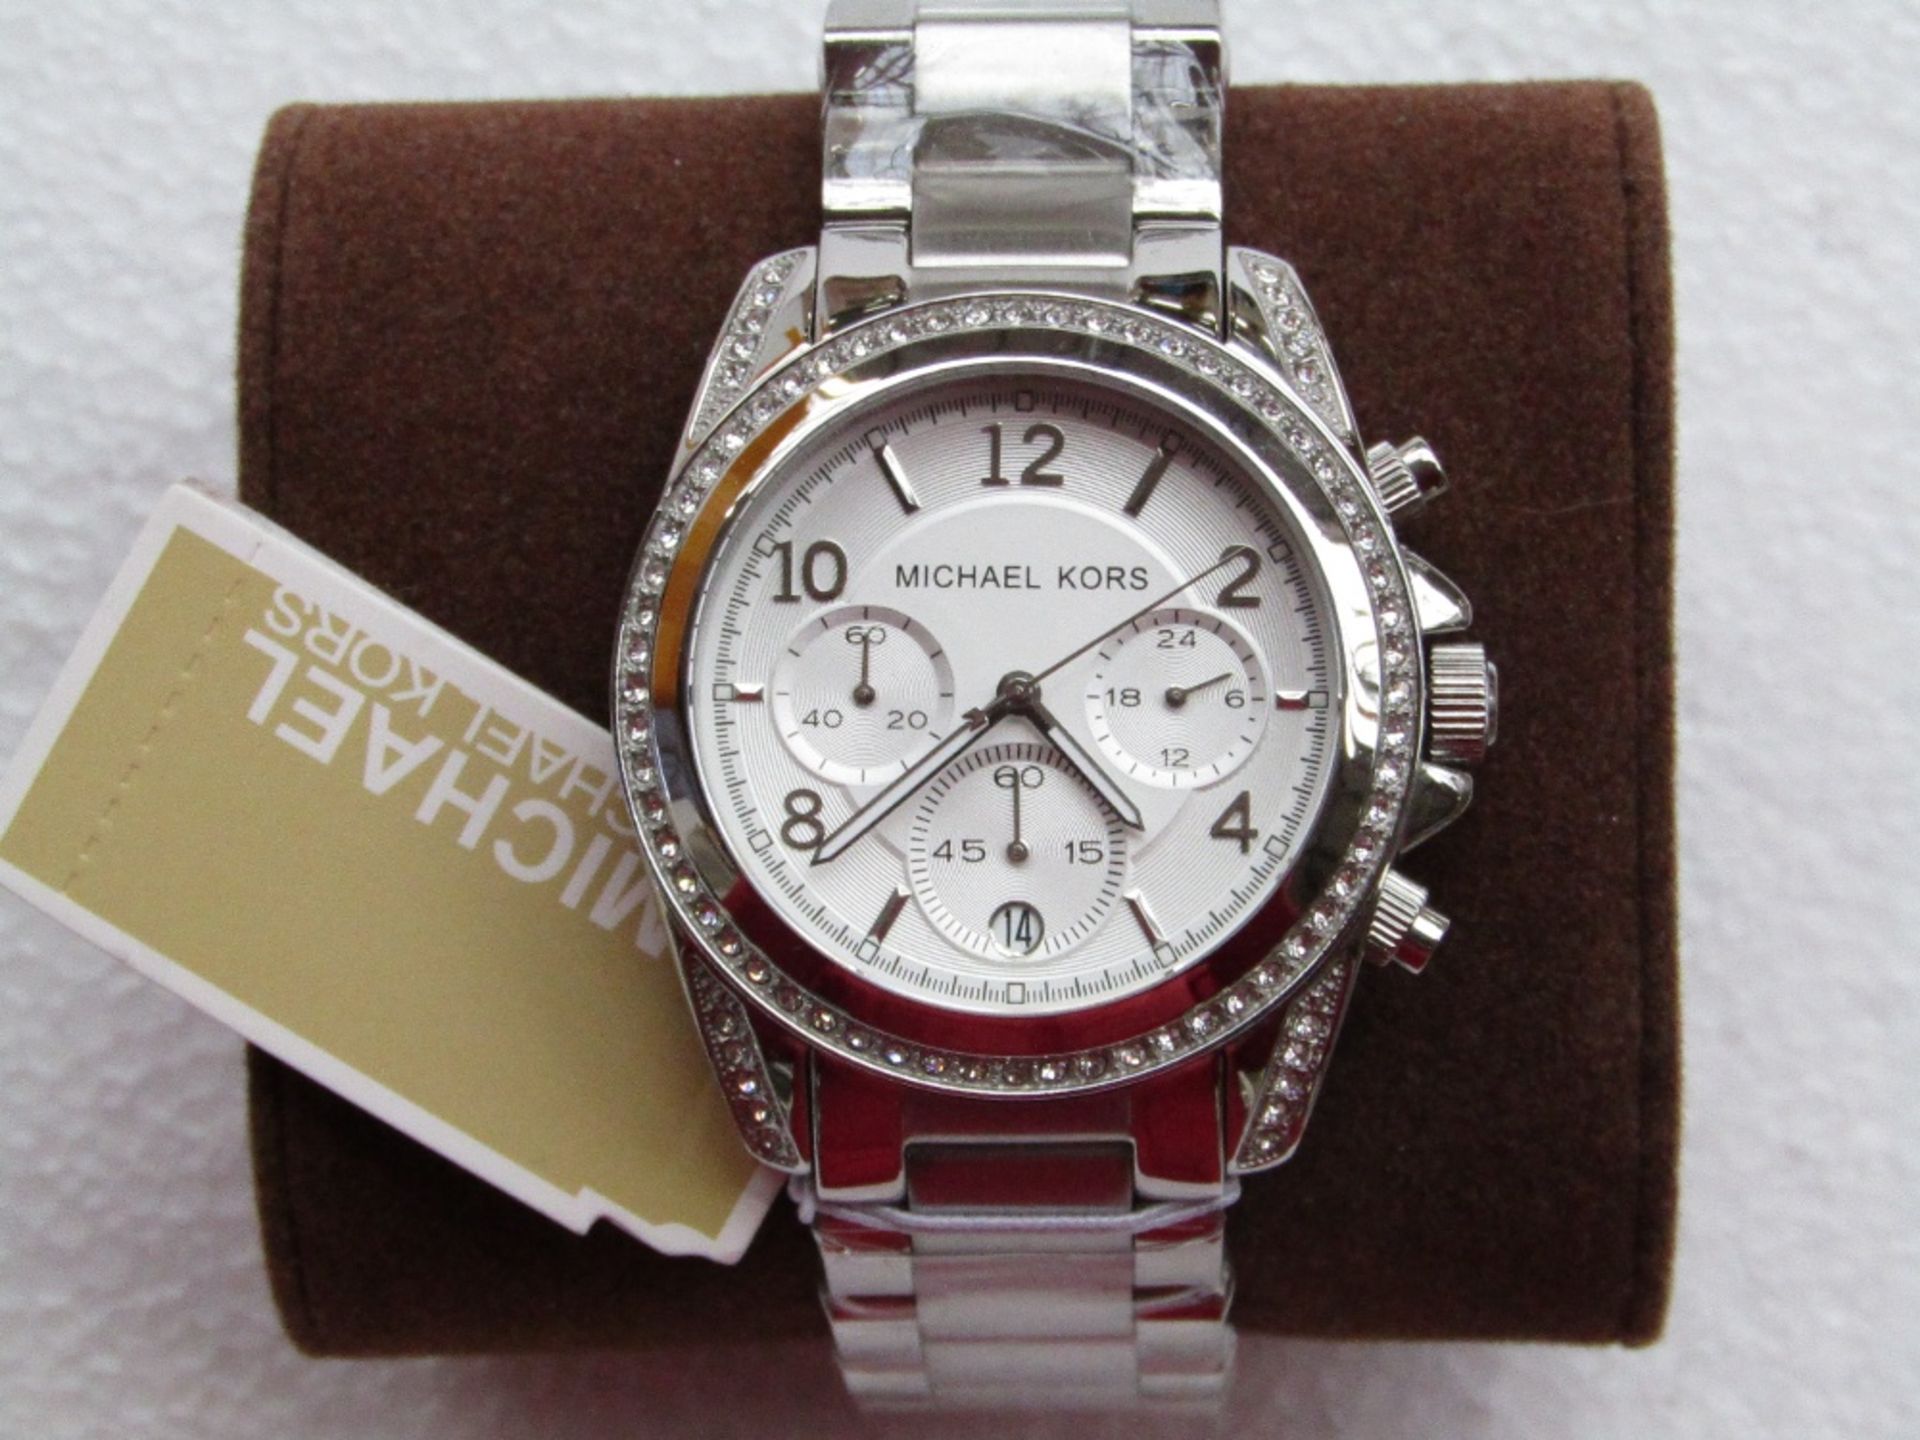 No VAT!!! Micheal Kors MK5165 watch, new and ticking in presentation case